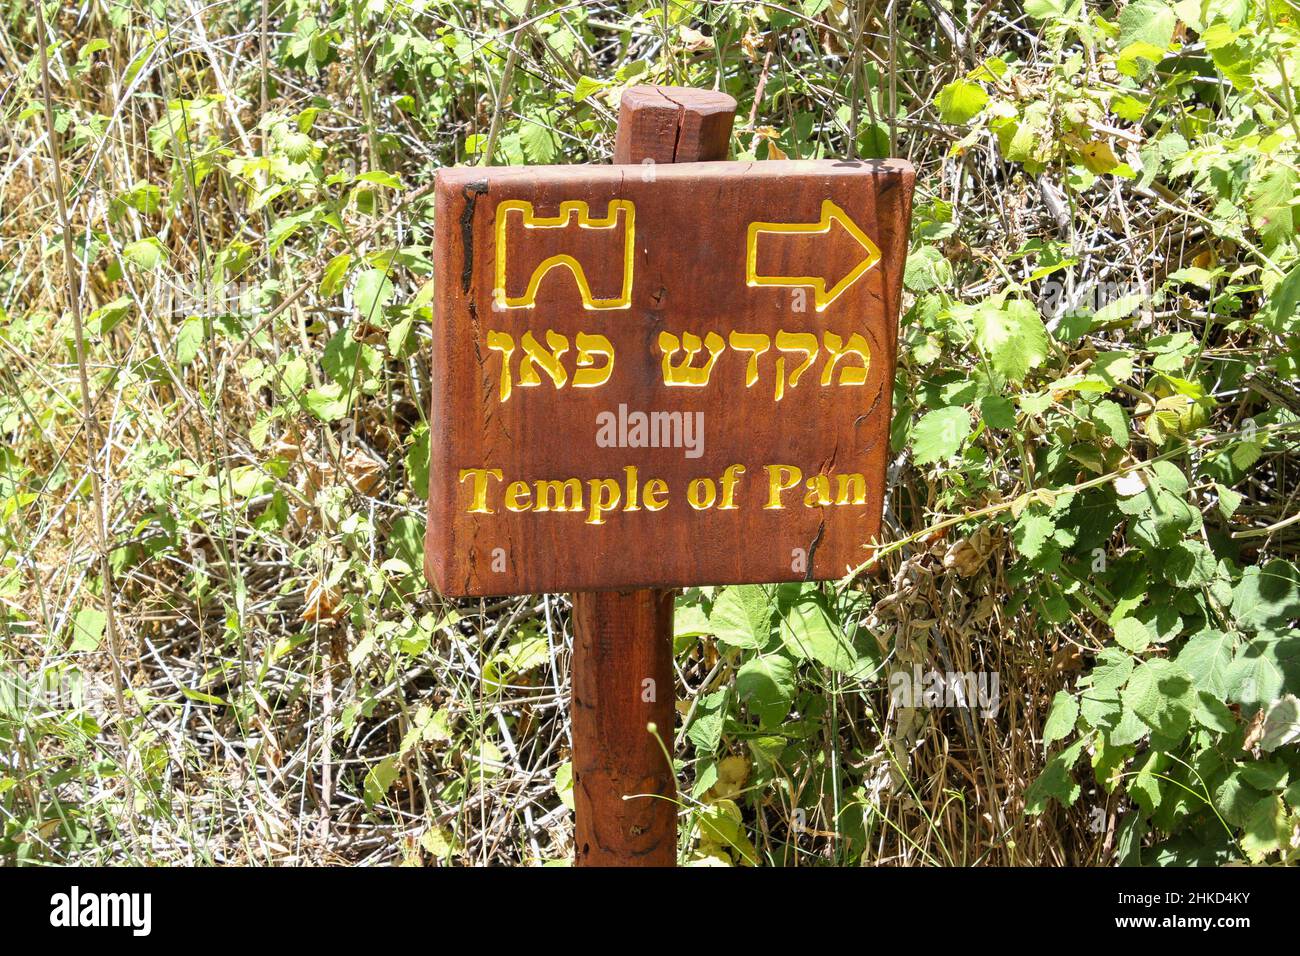 A brown wooden bilingual sign directs travelers to the Temple of Pan in the Herman Stream Banias Nature Reserve in the Golan Heights of Israel. Stock Photo